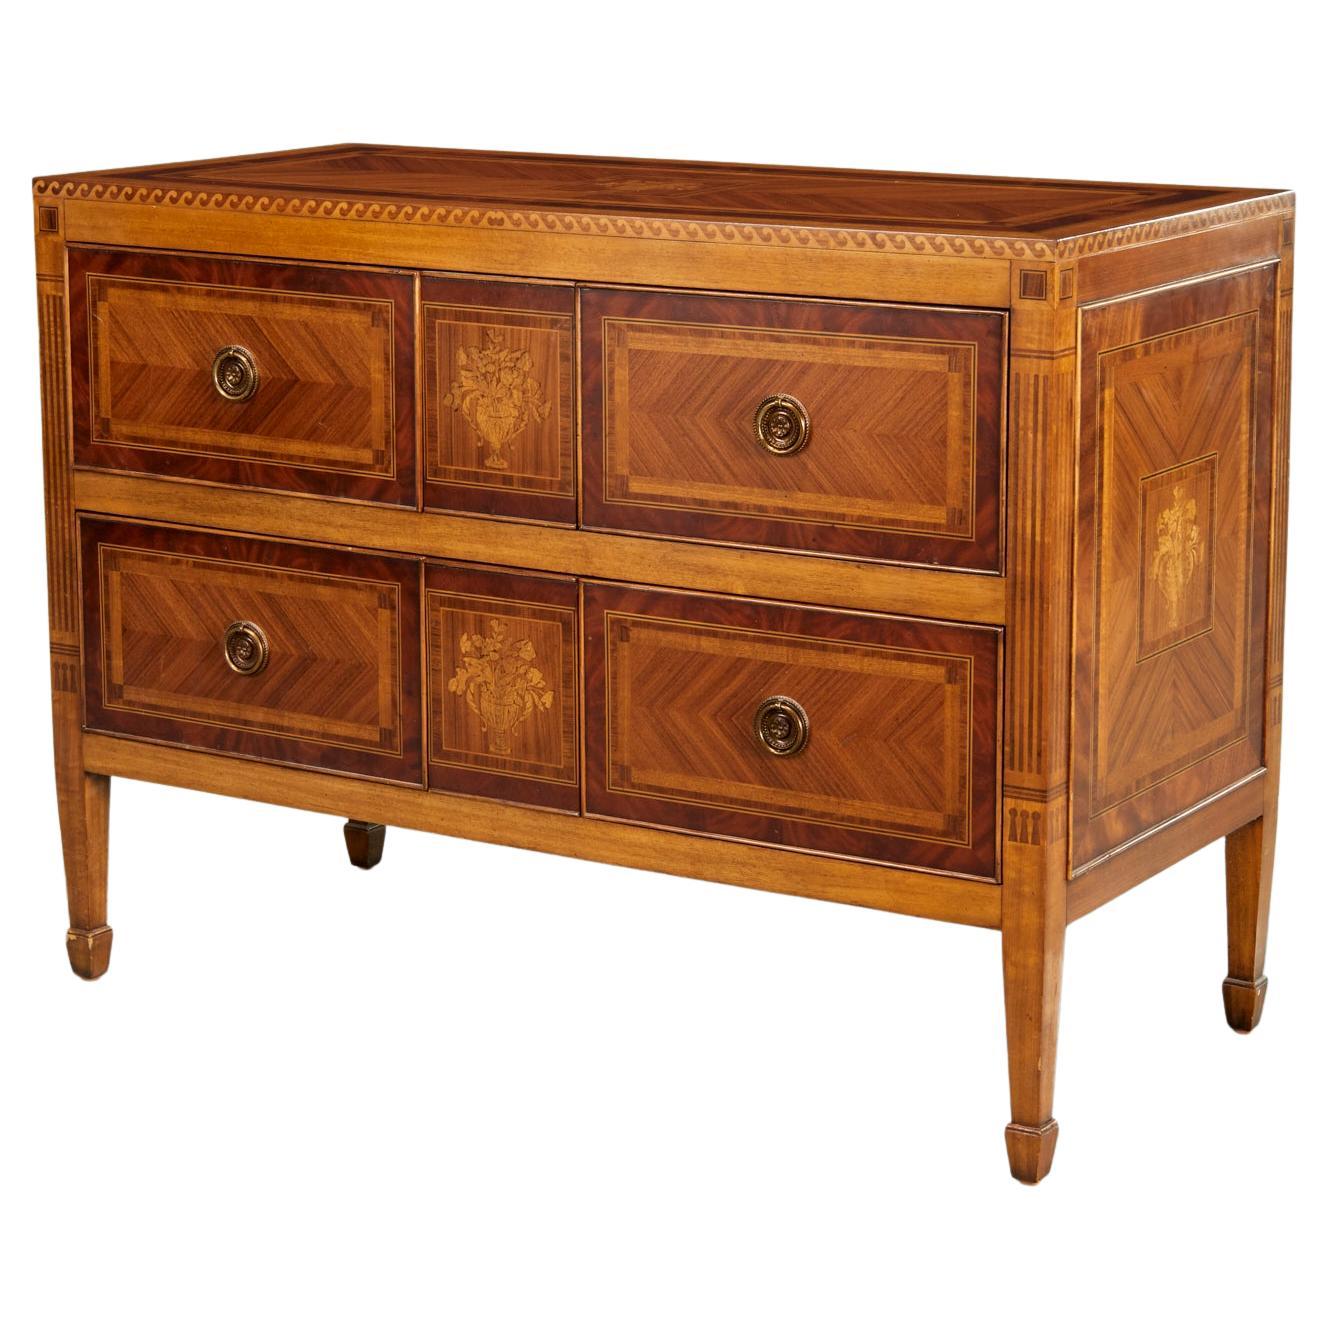 20th C. Maitland-Smith Italian Neoclassical Style Marquetry Commode